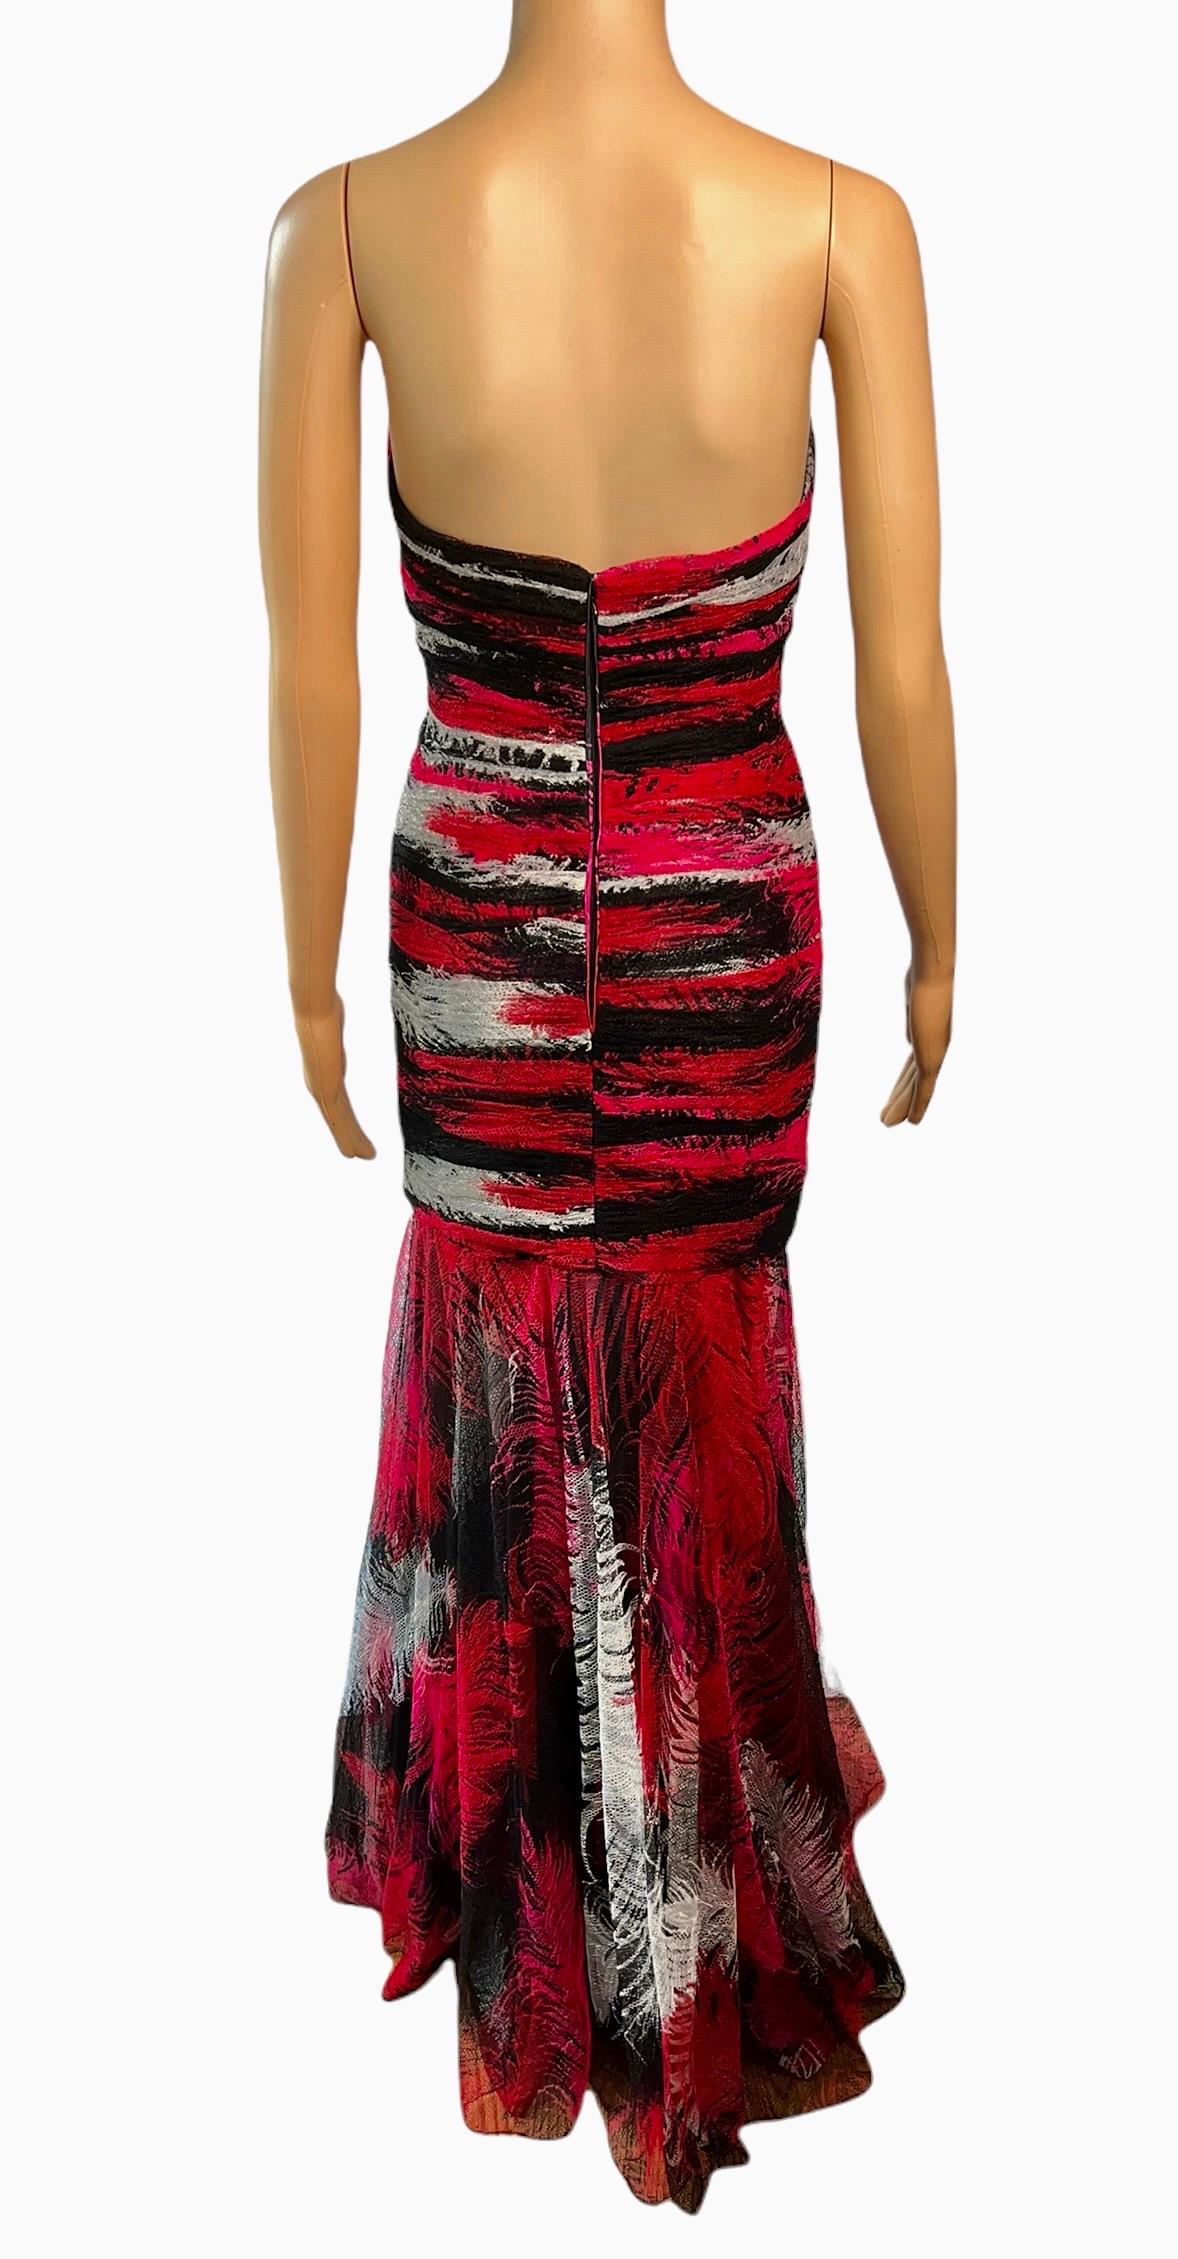 Gianni Versace F/W 2001 Runway Bustier Feather Print Silk Evening Dress Gown In Good Condition For Sale In Naples, FL